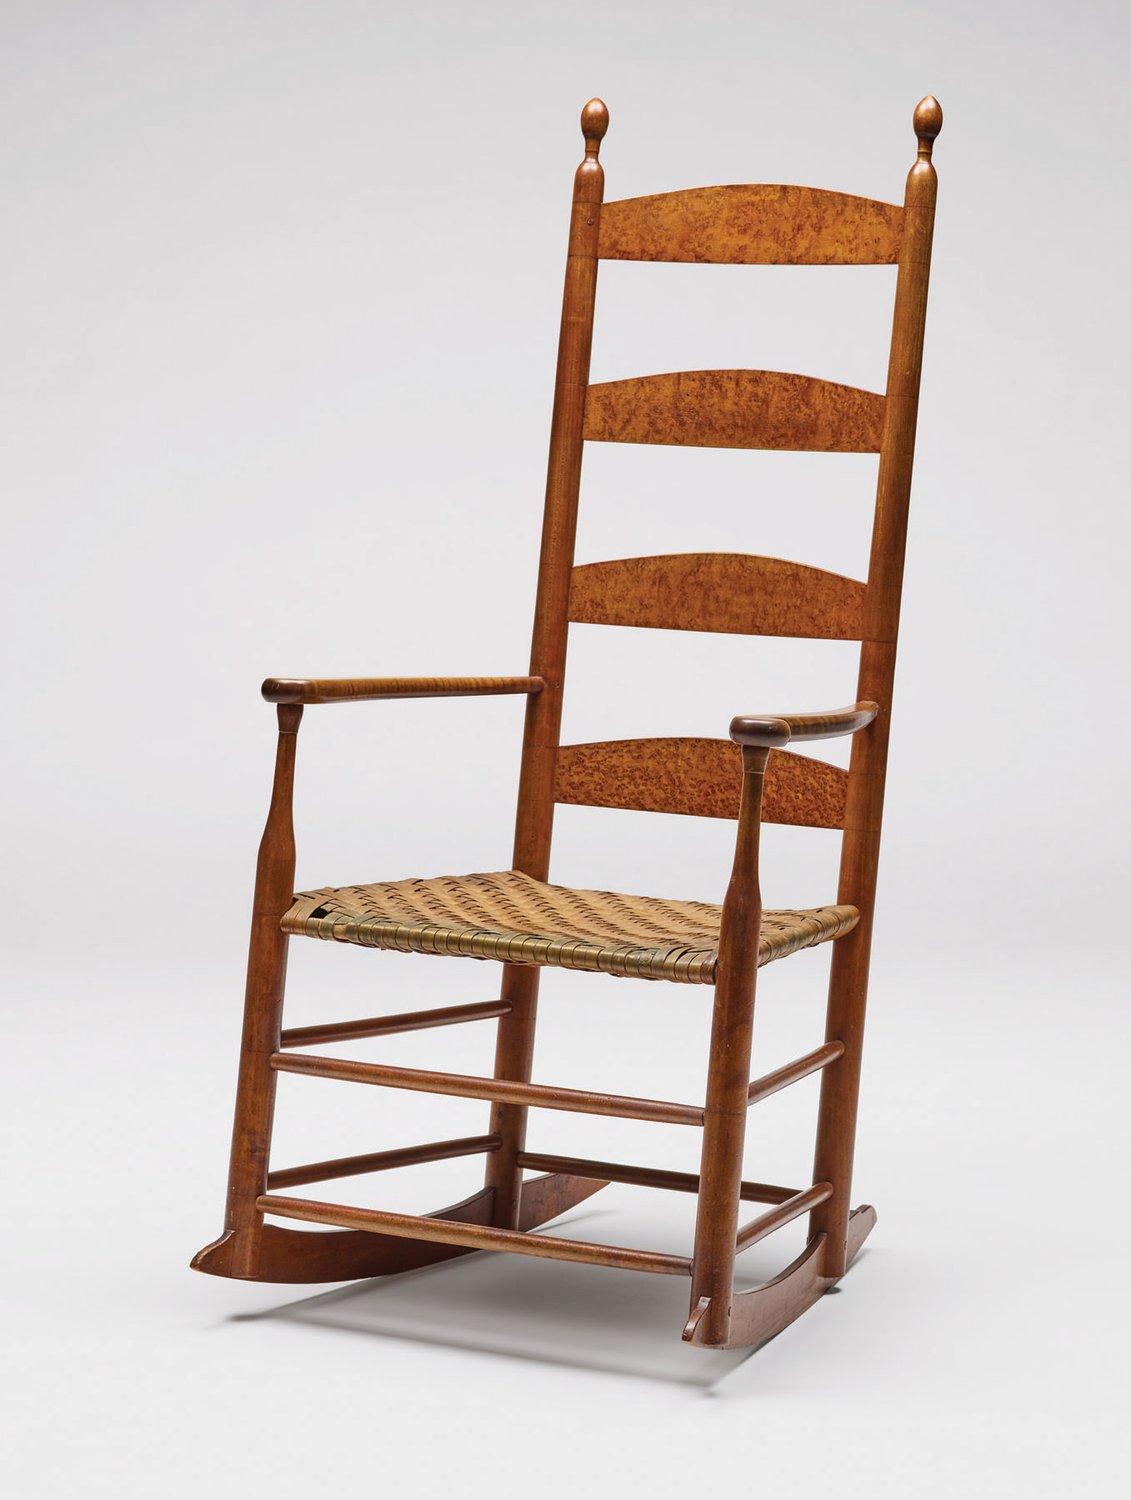 From “Roots,” an American, Shaker, (Mount Lebanon Community, New Lebanon, N.Y.,  Rocking Chair, 1840–1860, maple, hickory. Philadelphia Museum of Art: Gift of Mr. and Mrs. Julius Zieget.